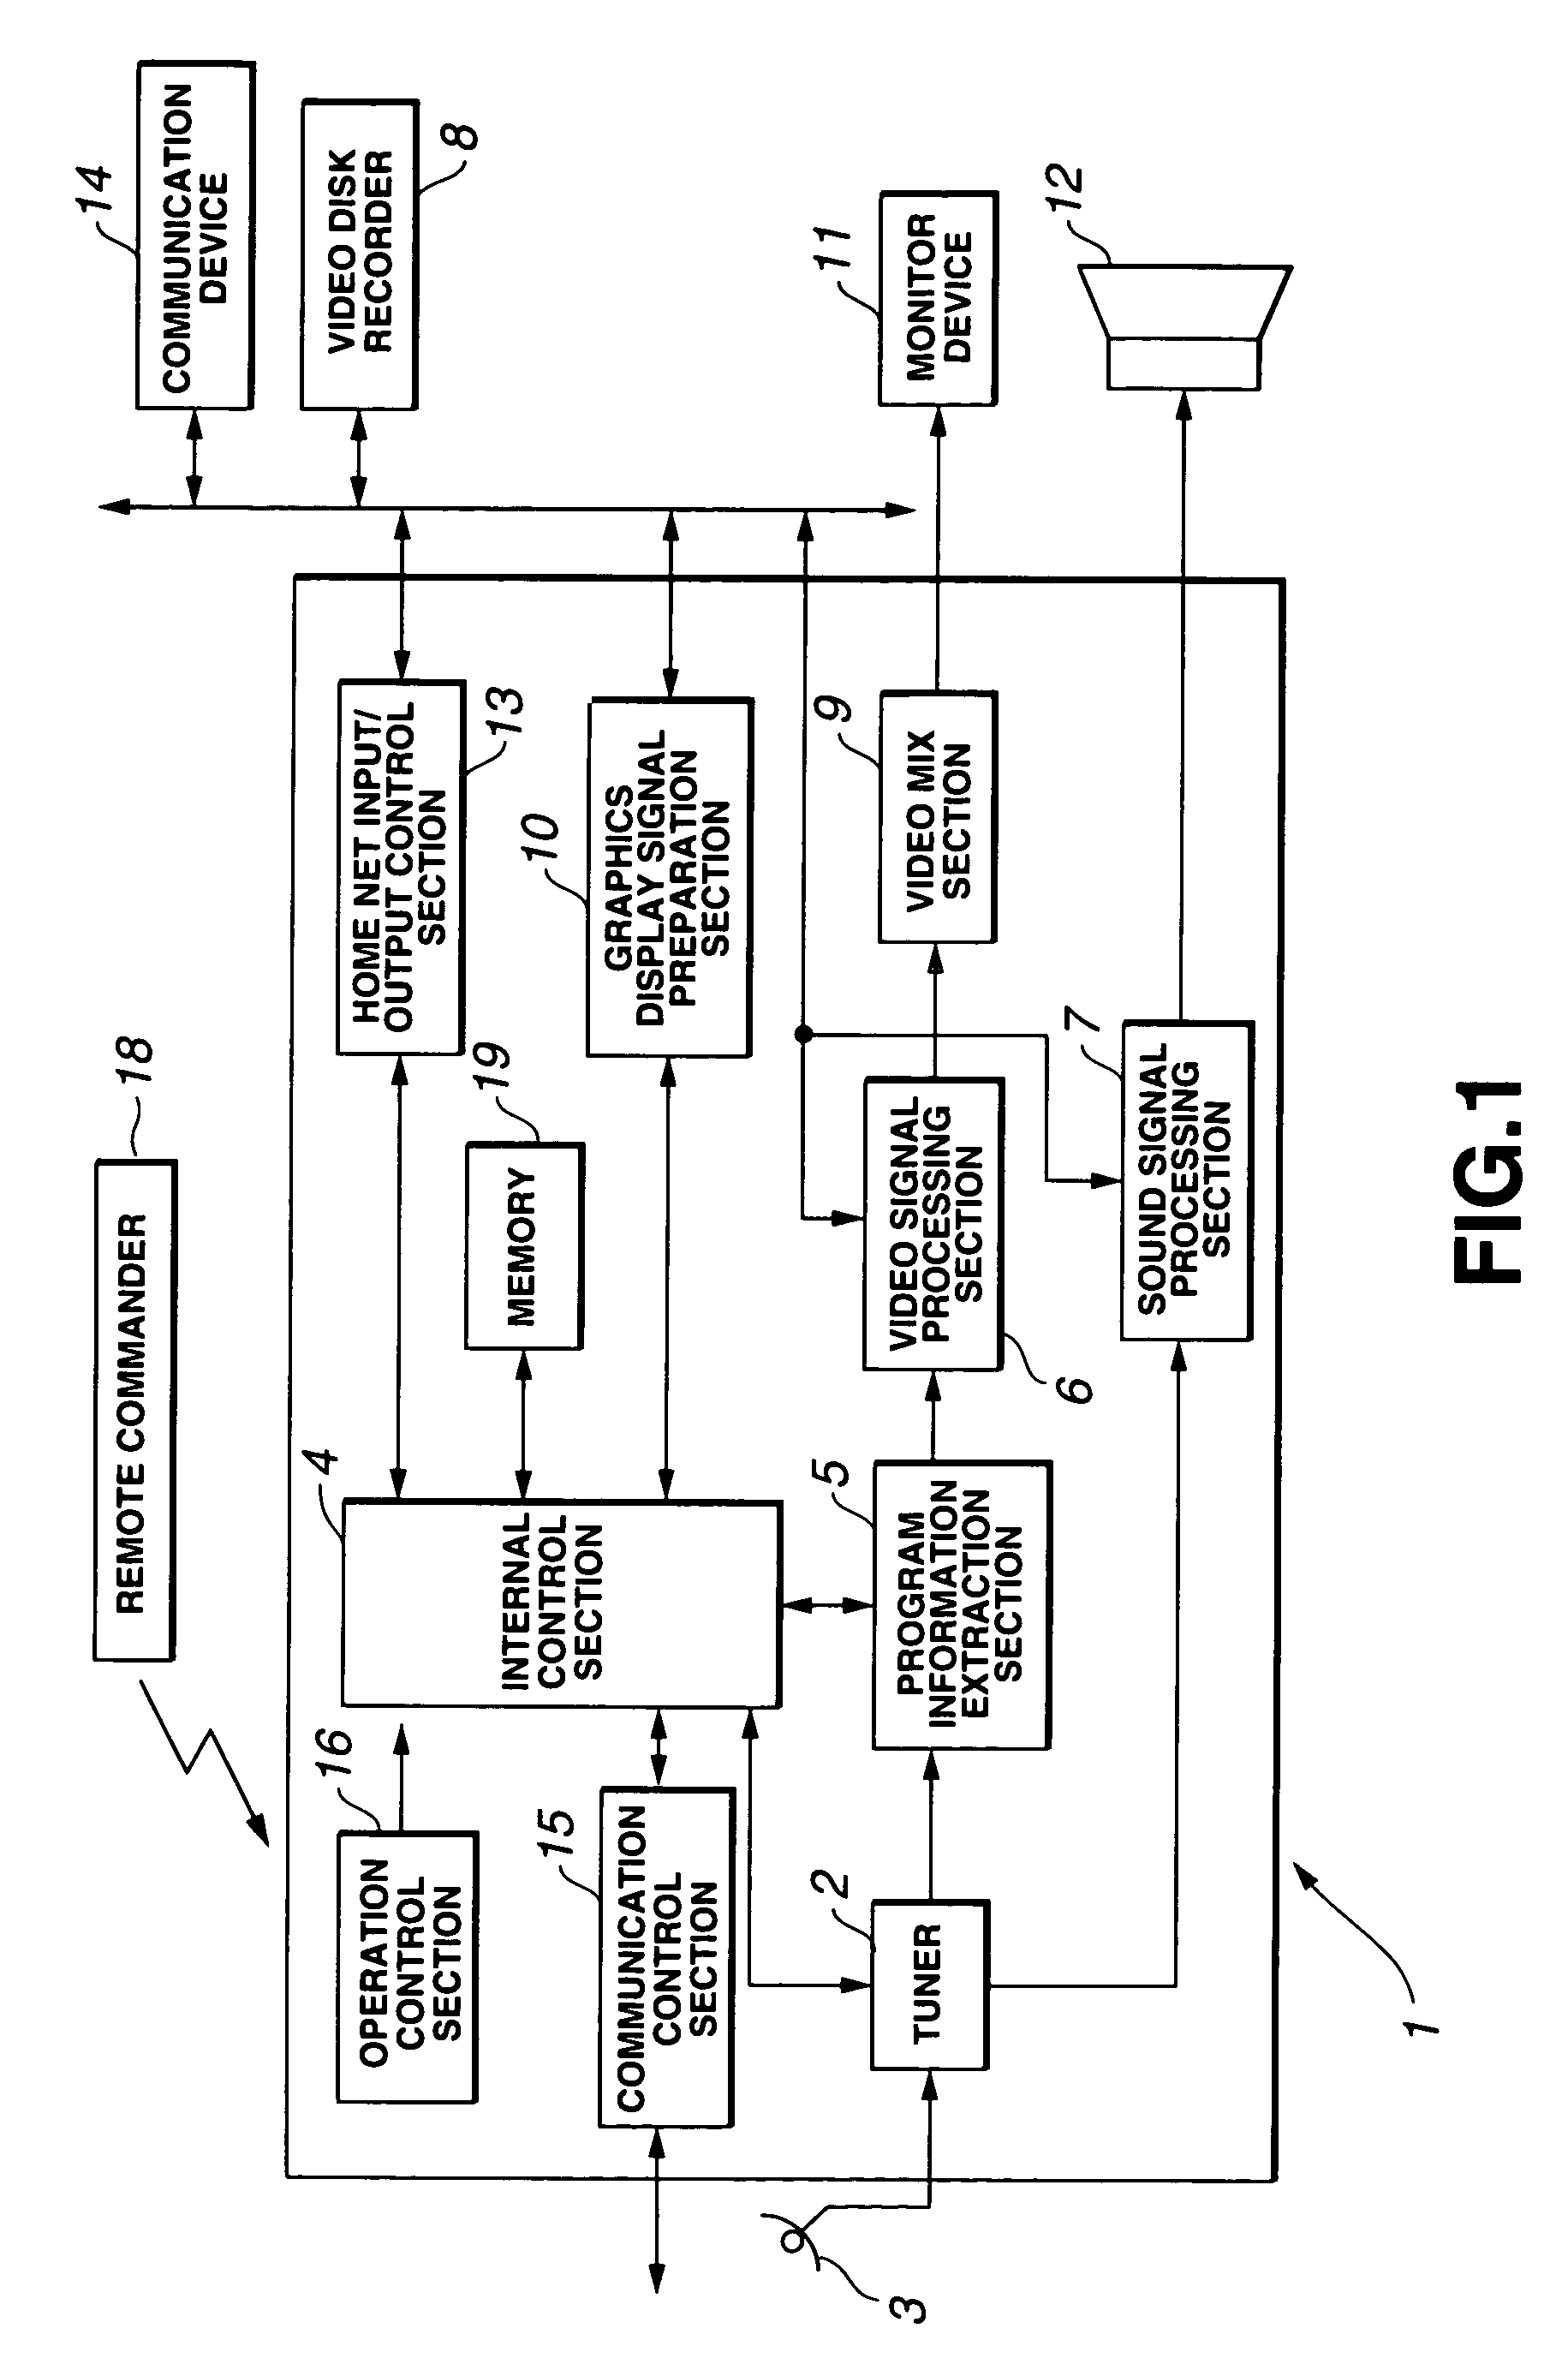 Method of zoom and fade transitioning between layers of information screens